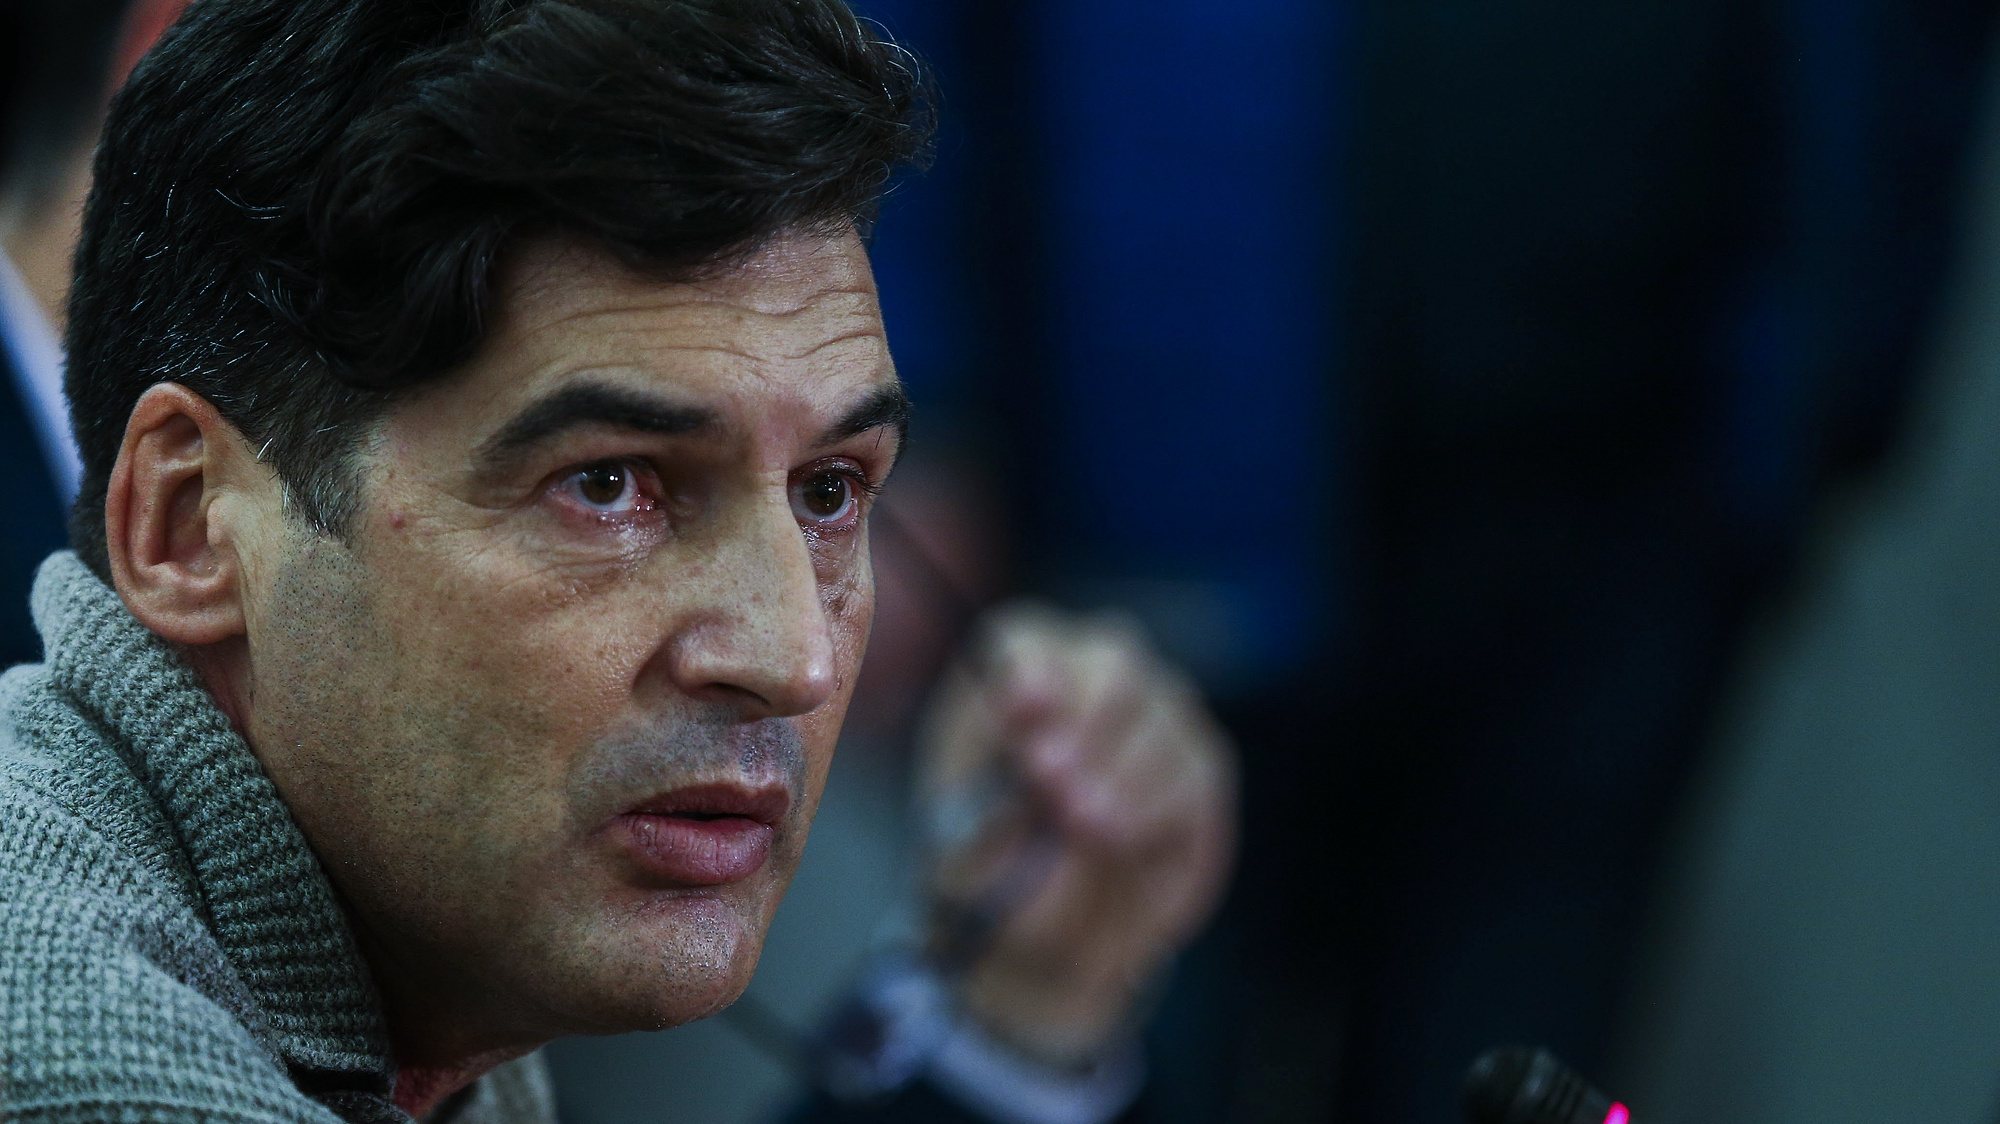 Portuguse former head coach of Ukranian Shakhtar Donetsk soccer team Paulo Fonseca during a press conference after their arrival at Humberto Delgado Airport, in Lisbon, Portugal, 28 February 2022. Portuguese and Portuguese-Ukrainian citizens who left Ukraine in the last few days, organized by the Portuguese Embassy in Kiev, and some also by their own means, upon arrival in Lisbon on a flight from Bucharest.  Thousands of people desperately trying to leave Kyiv, the capital of Ukraine, which has been under Russian military assault. Russian troops entered Ukraine on 24 February prompting the country&#039;s president to declare martial law and triggering a series of severe economic sanctions imposed by Western countries on Russia. MANUEL DE ALMEIDA/LUSA